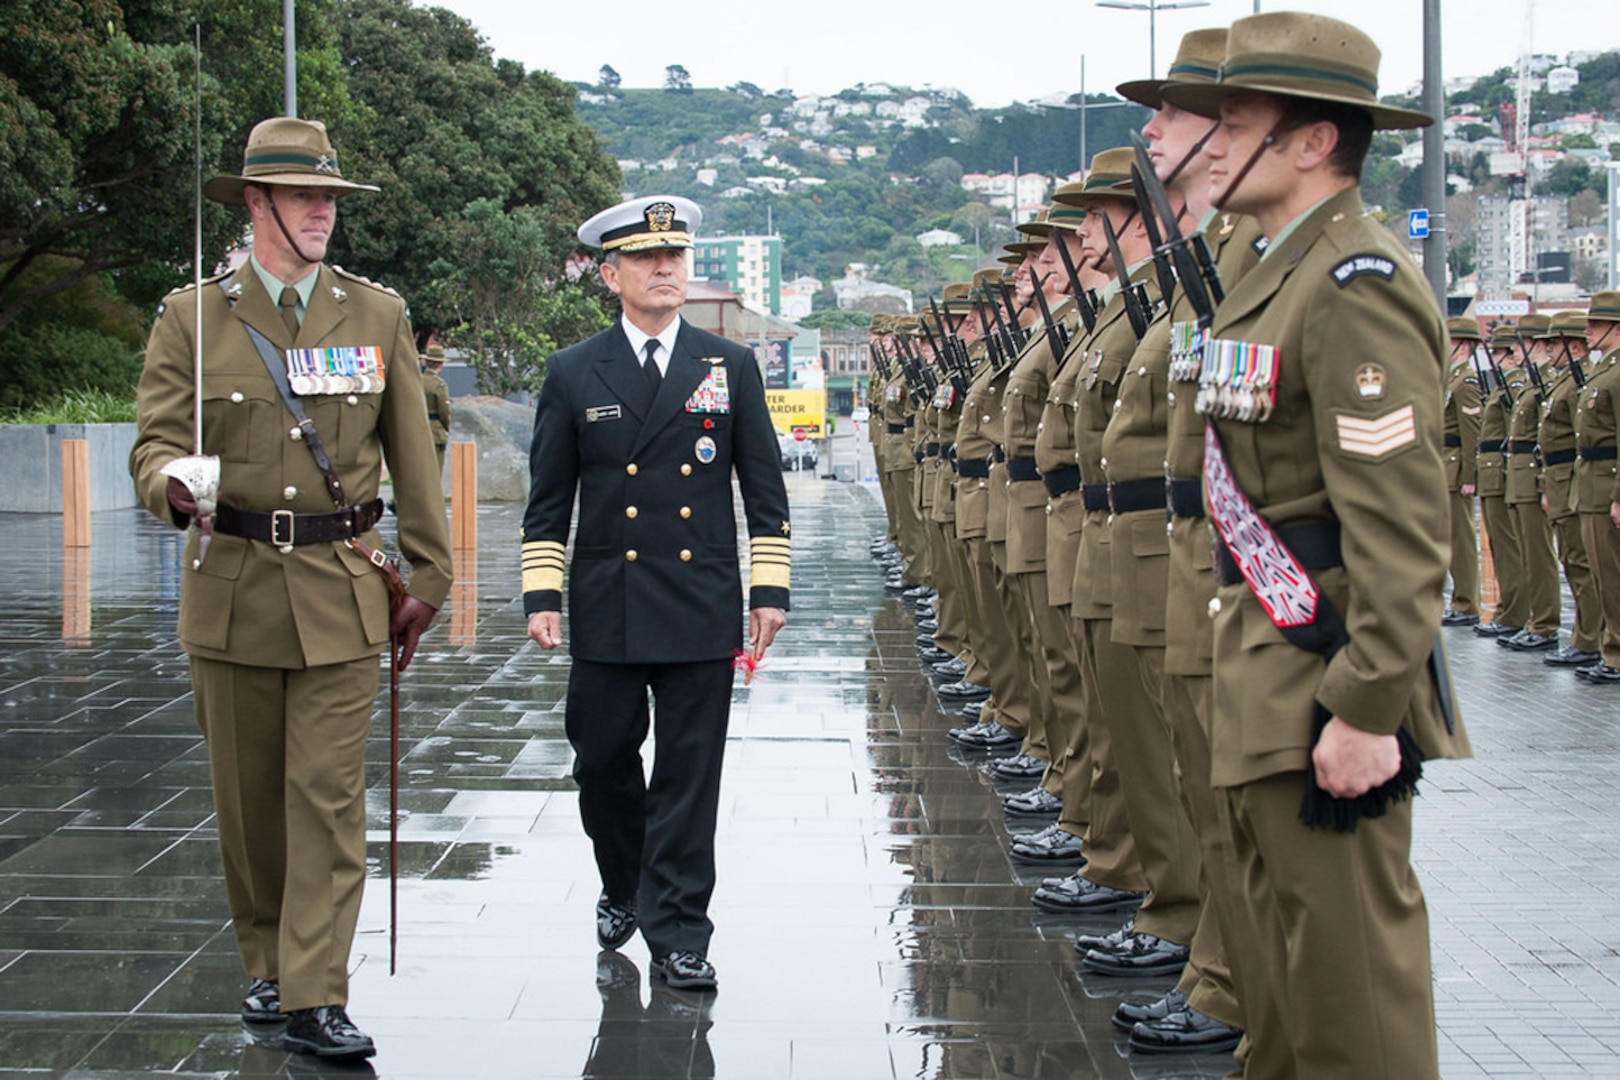 New Zealand (July 6, 2015) -  The Commander of United States Pacific Command, Admiral Harry B. Harris arrived in New Zealand for discussions with the Government and senior defense officials.  